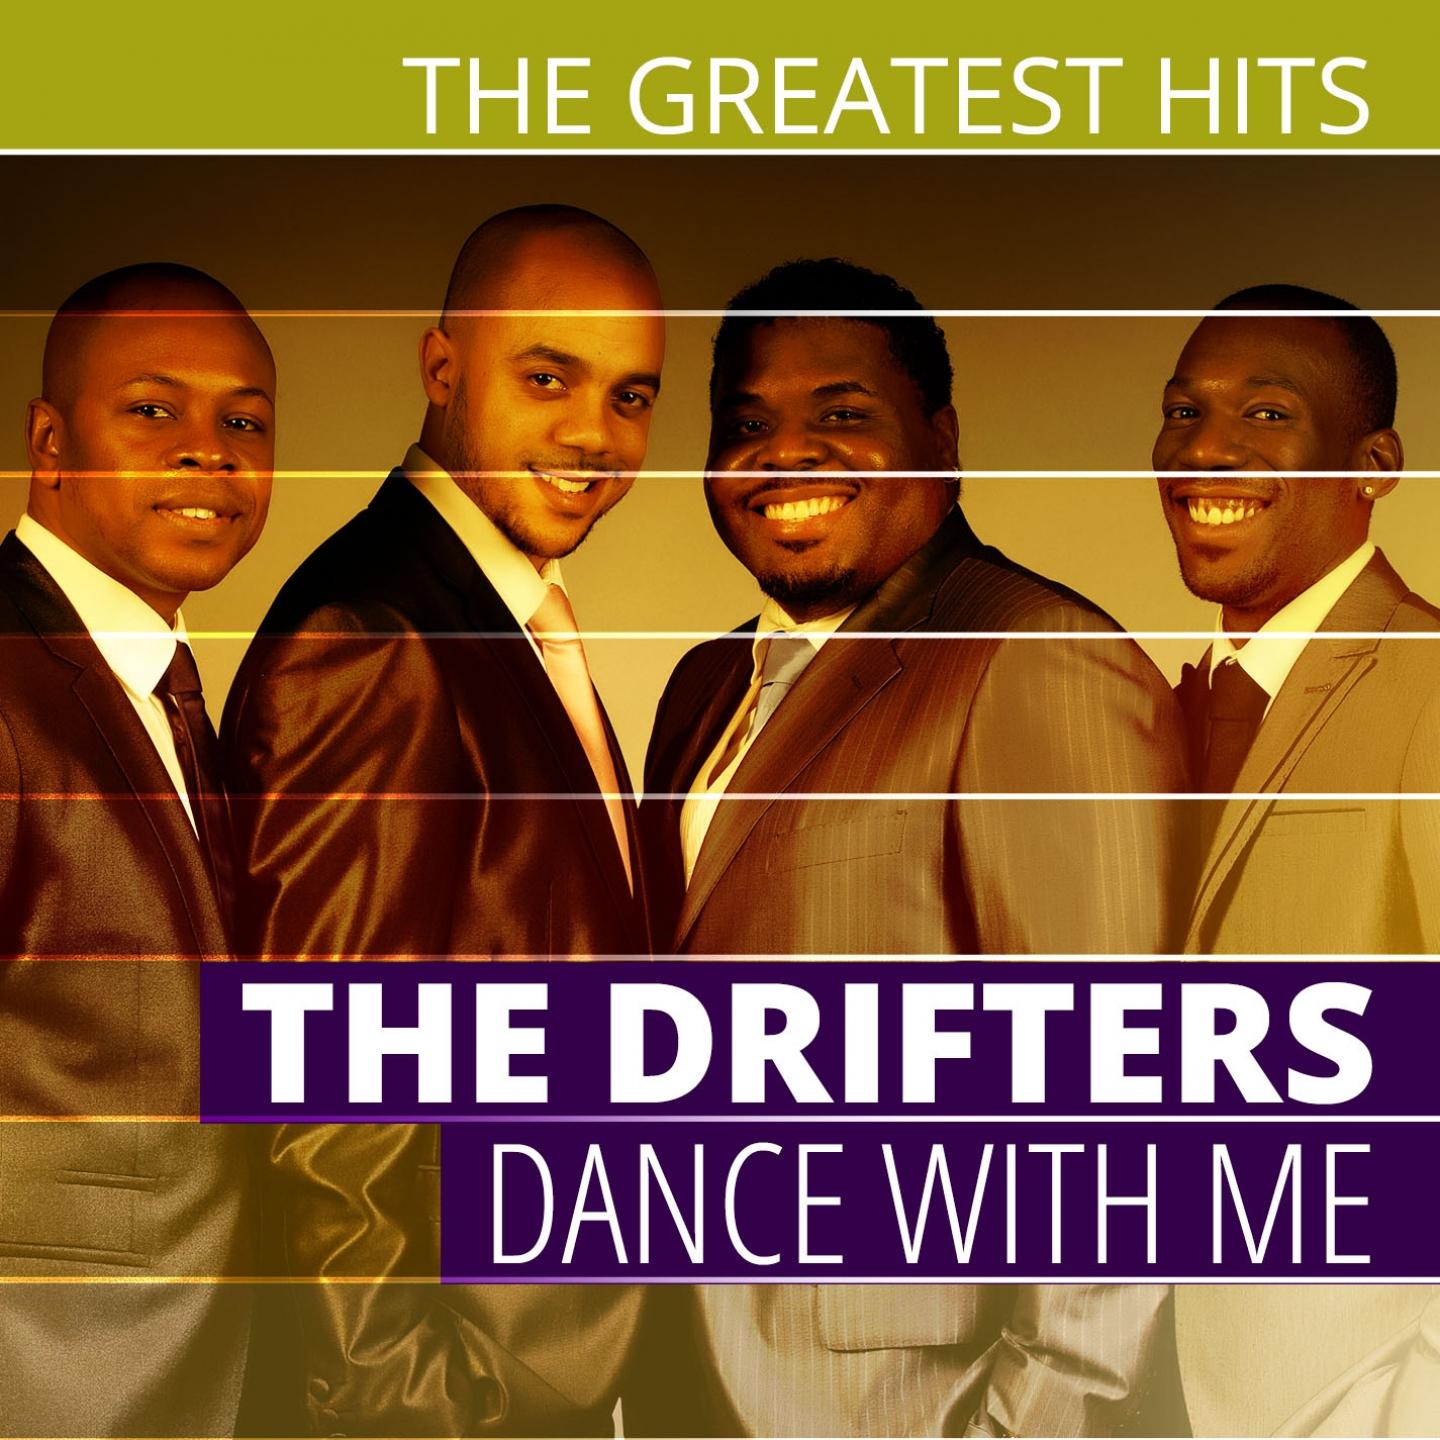 THE GREATEST HITS: The Drifters - Dance With Me